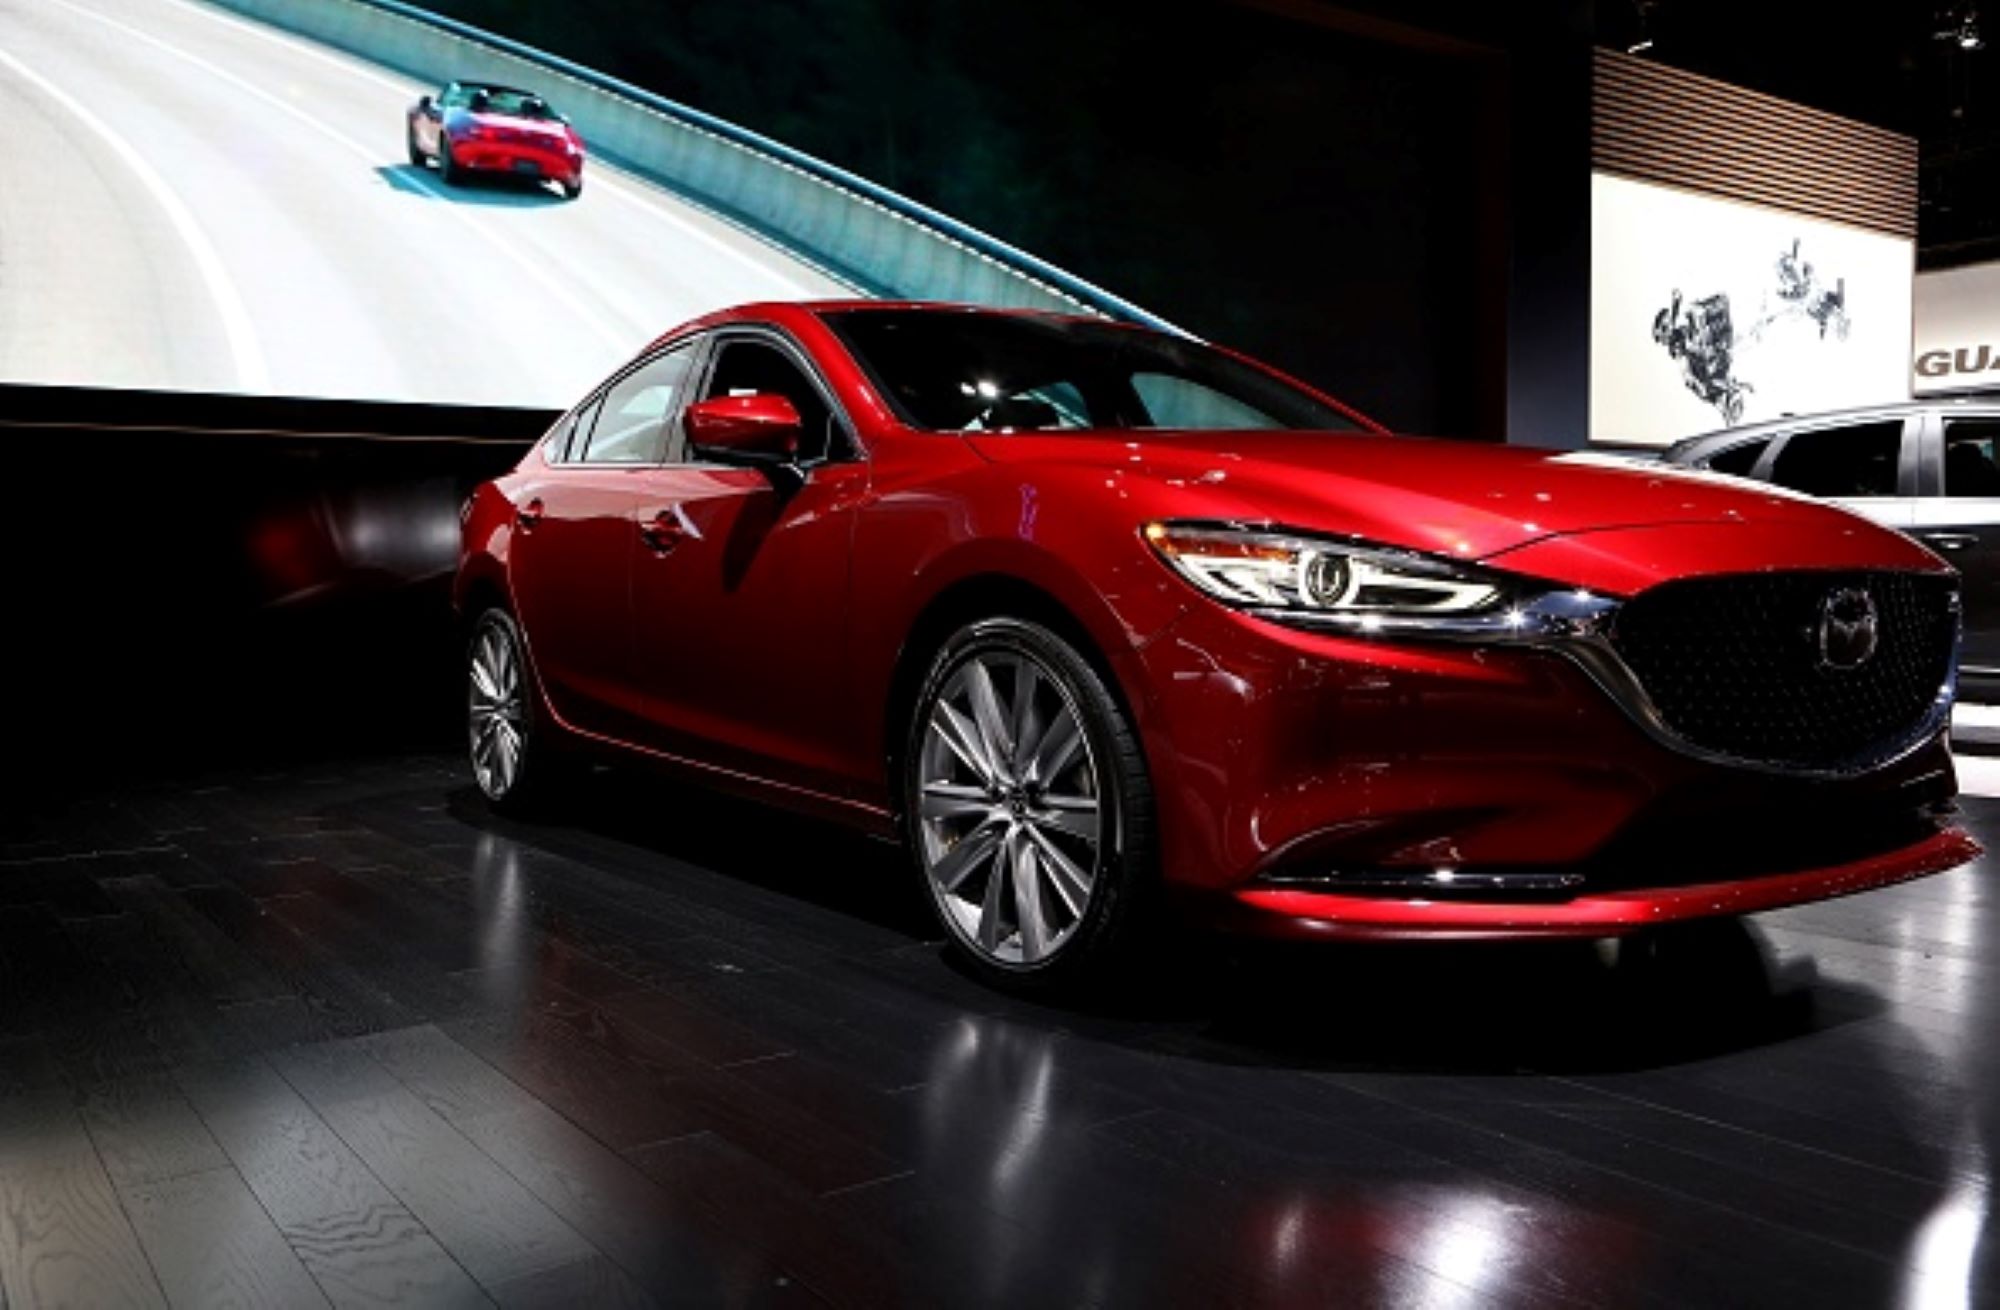 A red Mazda 6 parked in an indoor area with a screen in the background showing a highway with another Mazda 6 driving on it.